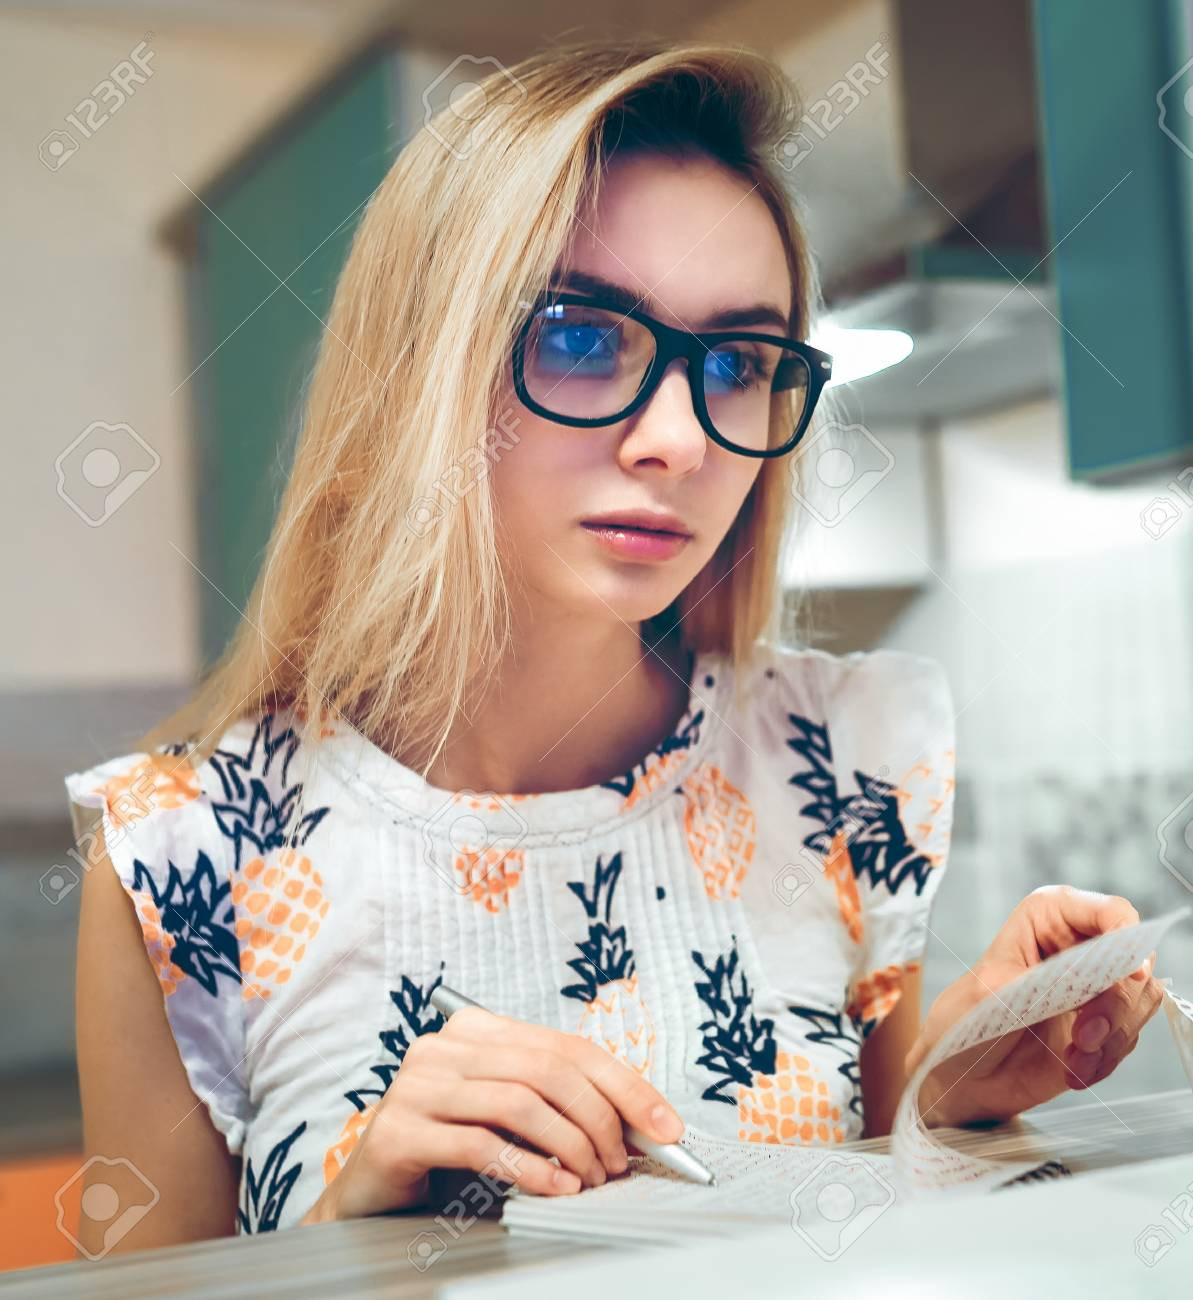 69628970-blonde-girl-wearing-glasses-sitting-at-home-writing-in-a-paper-notebook.jpg